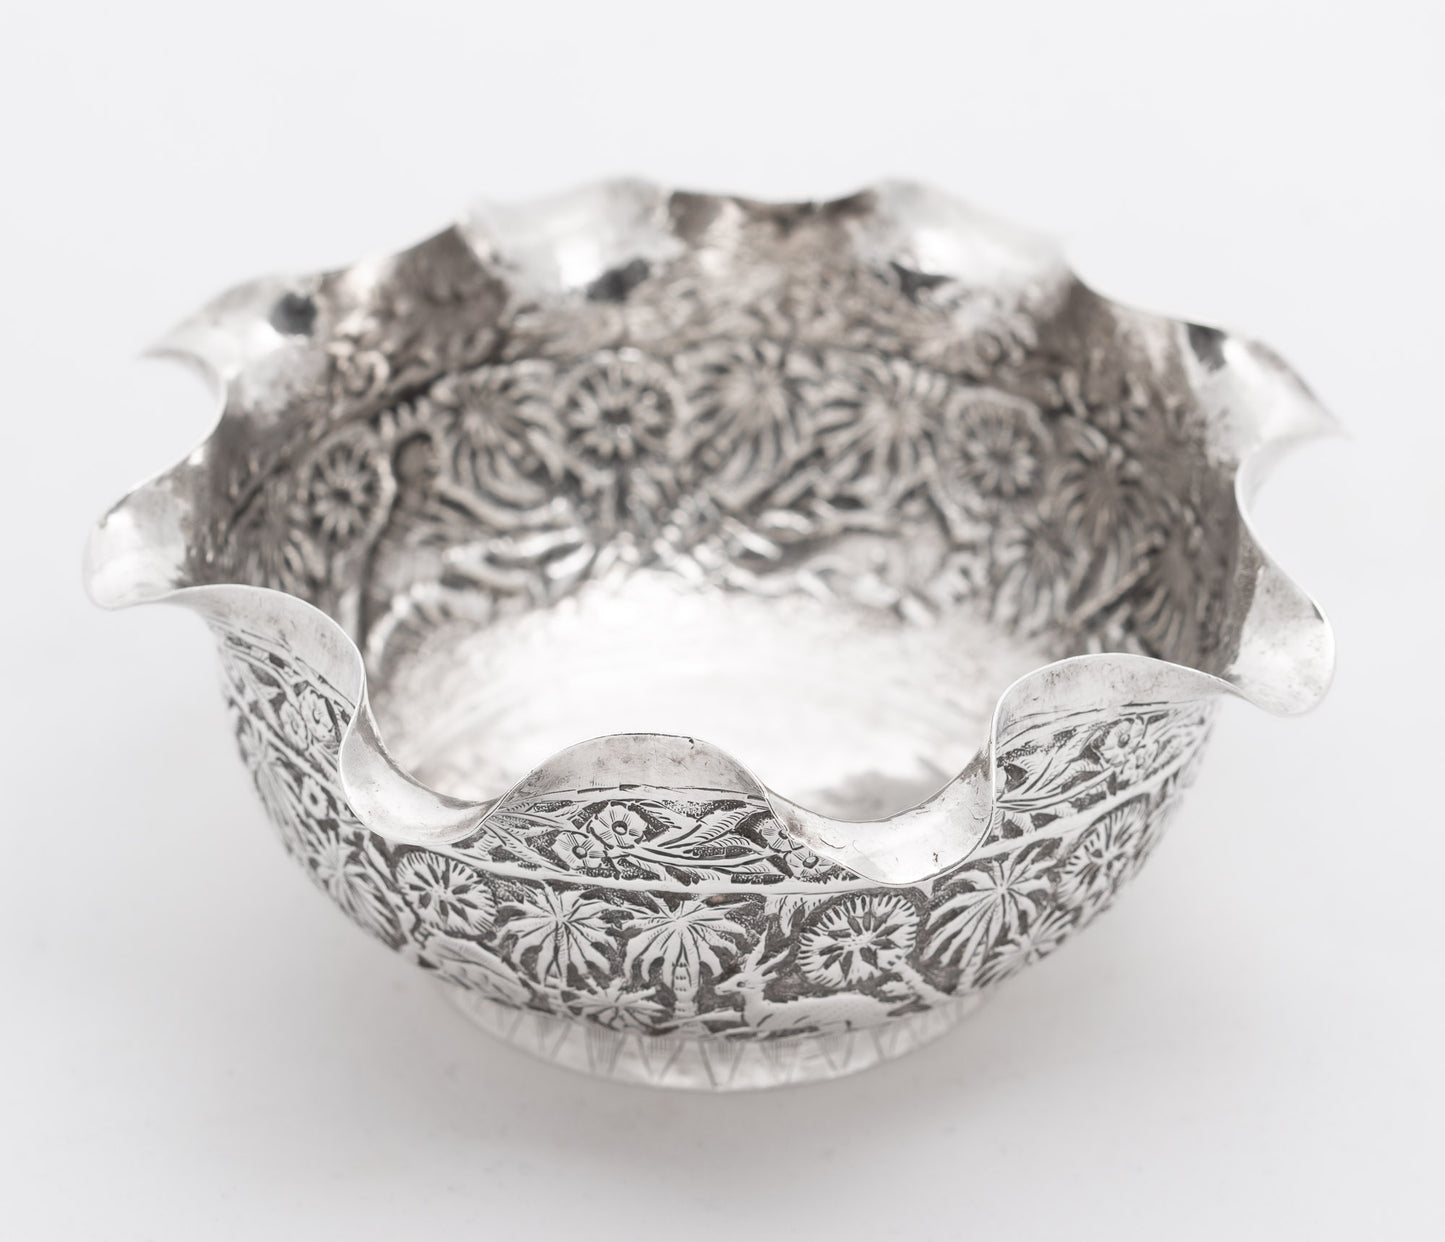 Antique Indian Sterling Silver Lucknow Repousse Bowl with Jungle Scenic c1890 (3093)